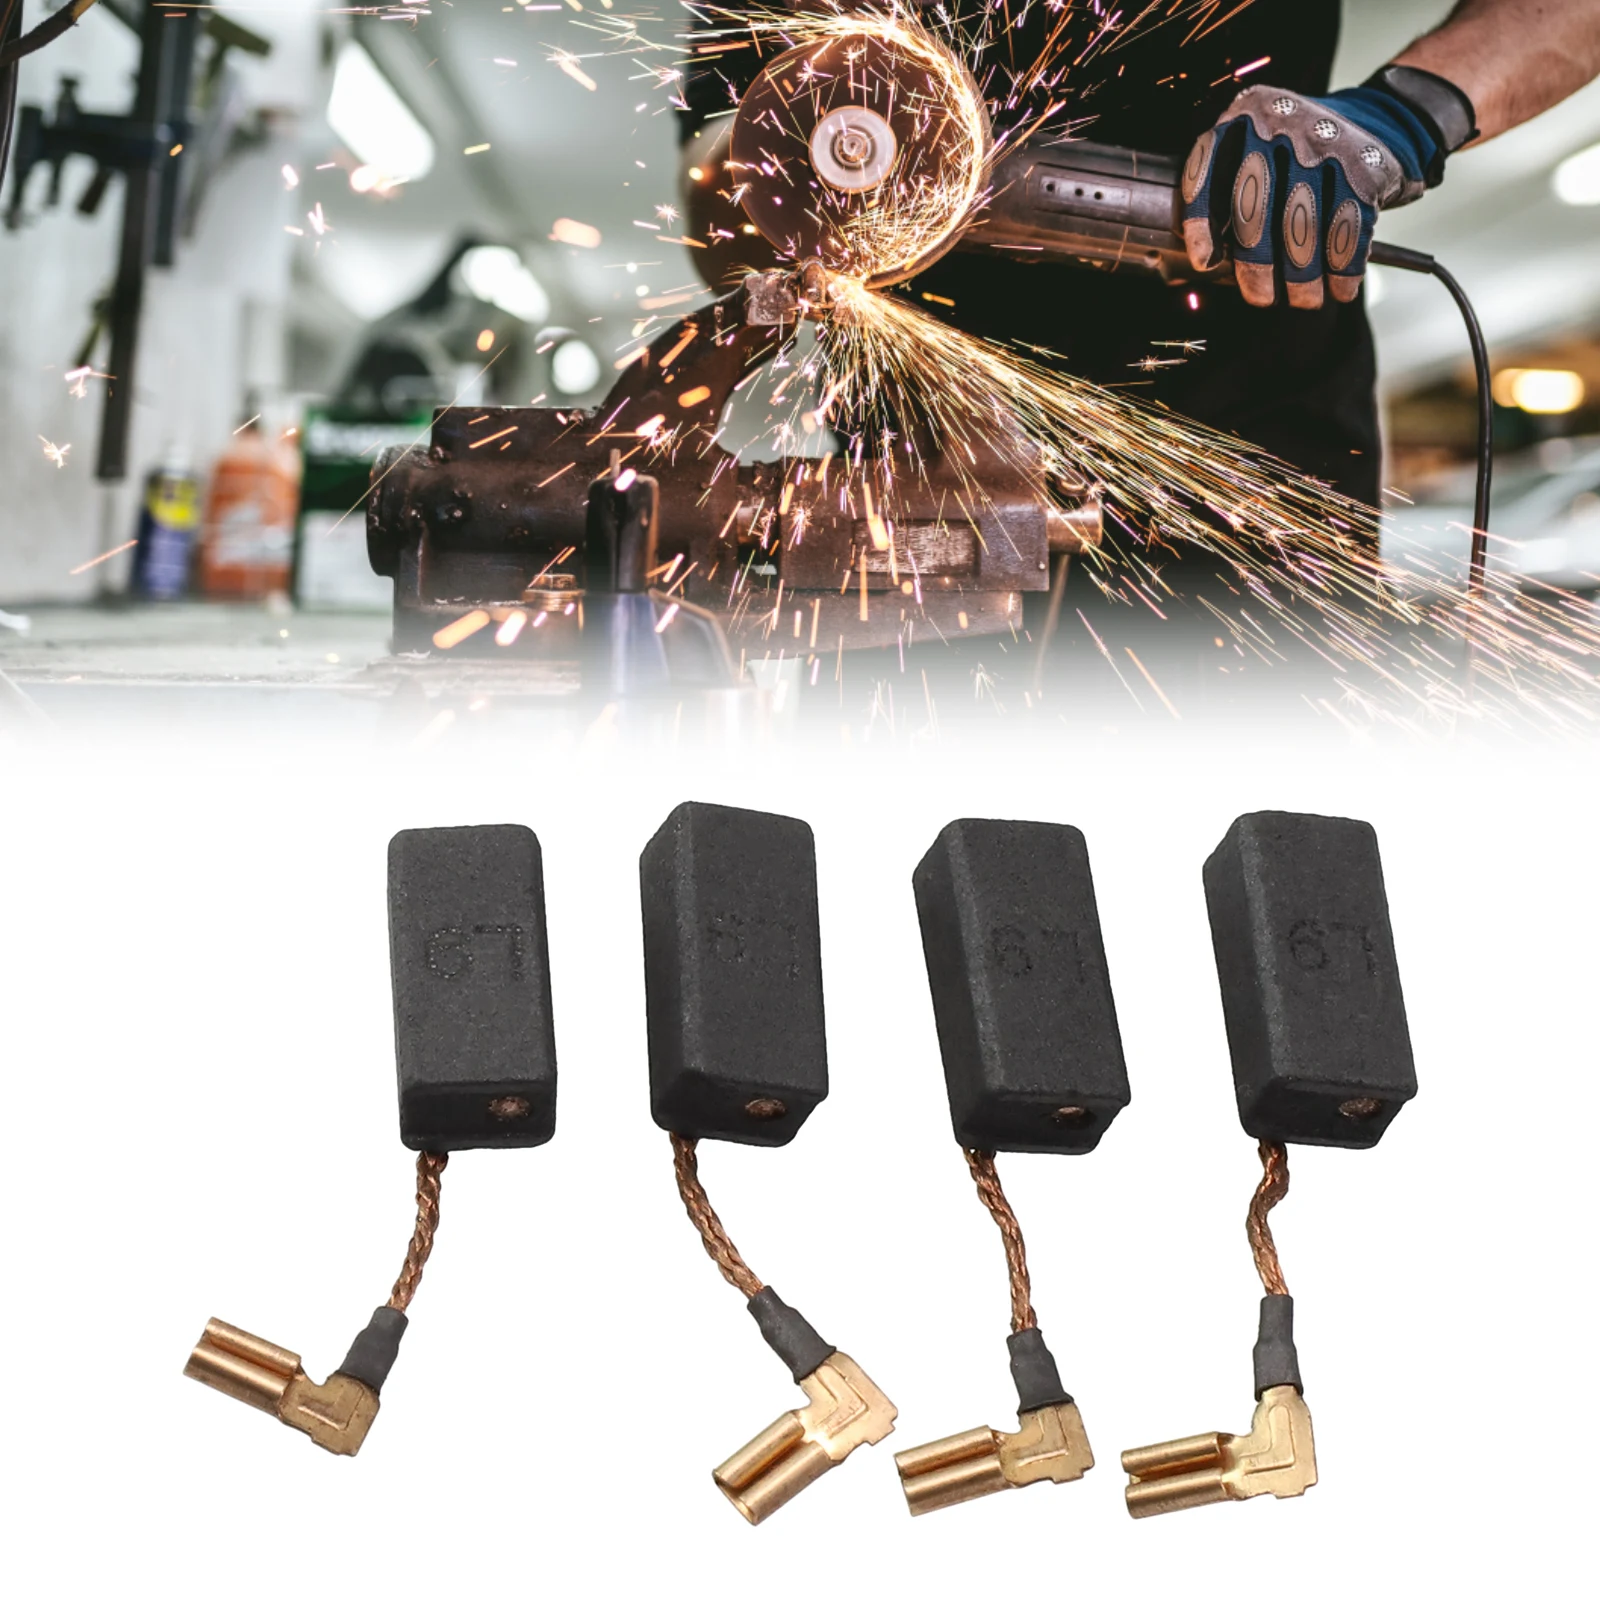 4pcs Carbon Motor Brush DWE4120 DWE4011 N097696 Grinder Motor Replacement Part High Quality Carbon Brushes Durable And Practical 7x17x17mm carbon brush carbon brushes for greenmaster gmd 118 1 reebok fusion e12 treadmill practical high quality